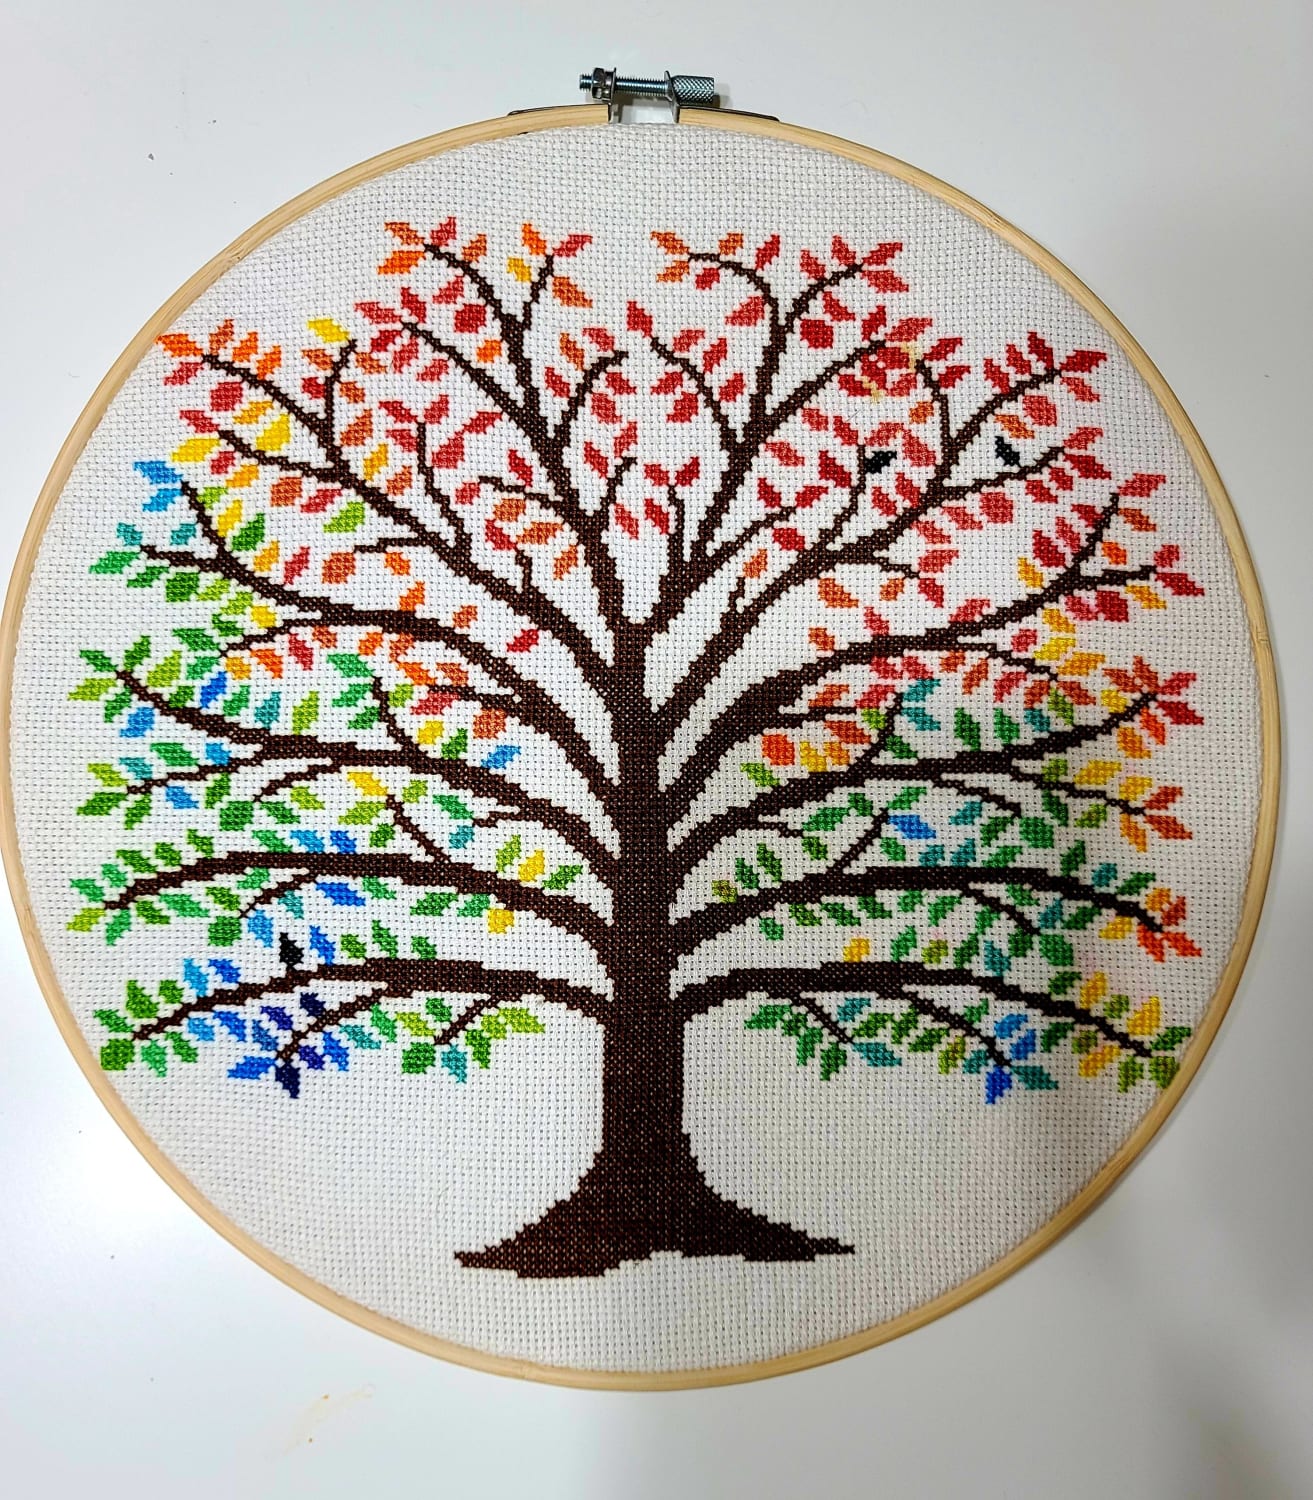 [FO] Finished my first SAL temperature tree for 2020! Details in the comments